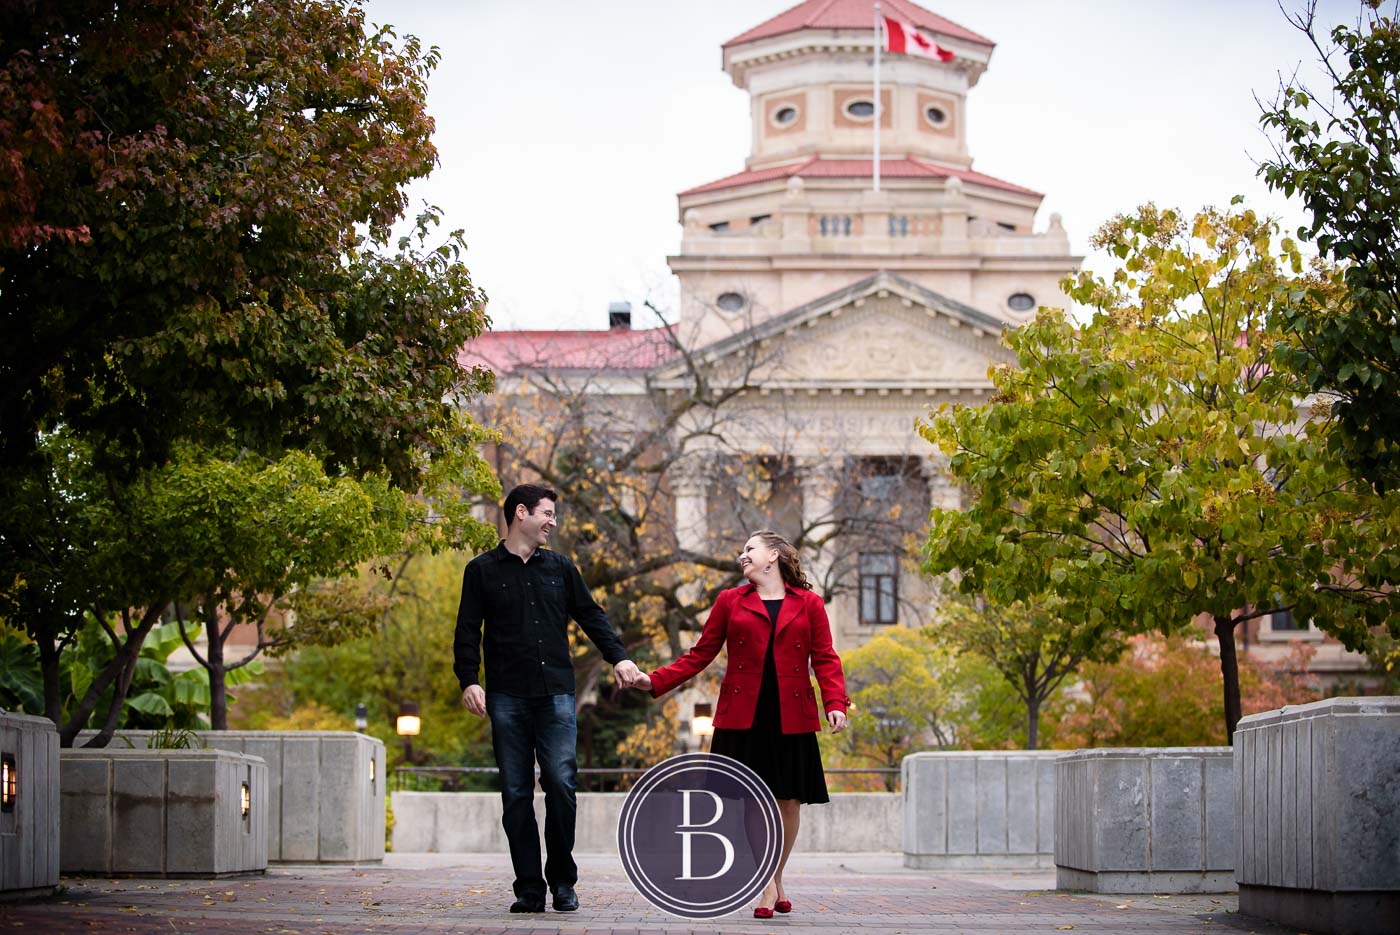 engagement photos at university, holding hands full of love